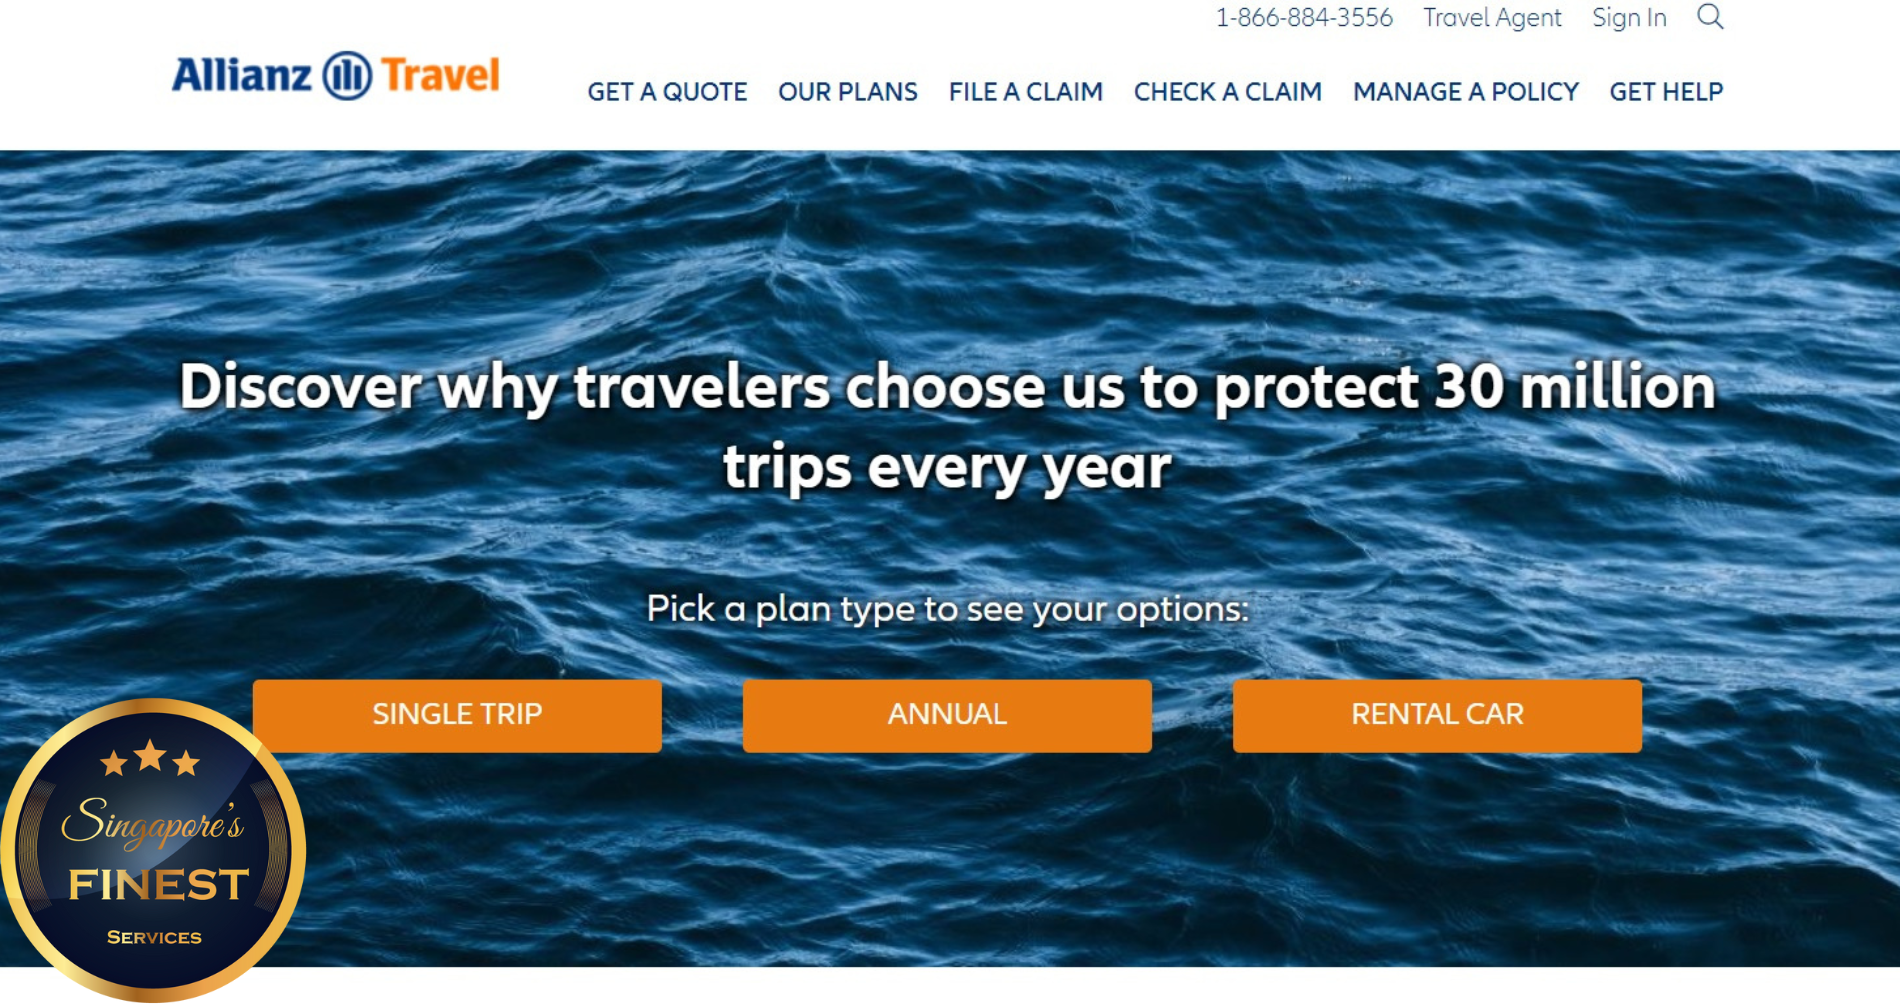 The Finest Travel Insurance in Singapore